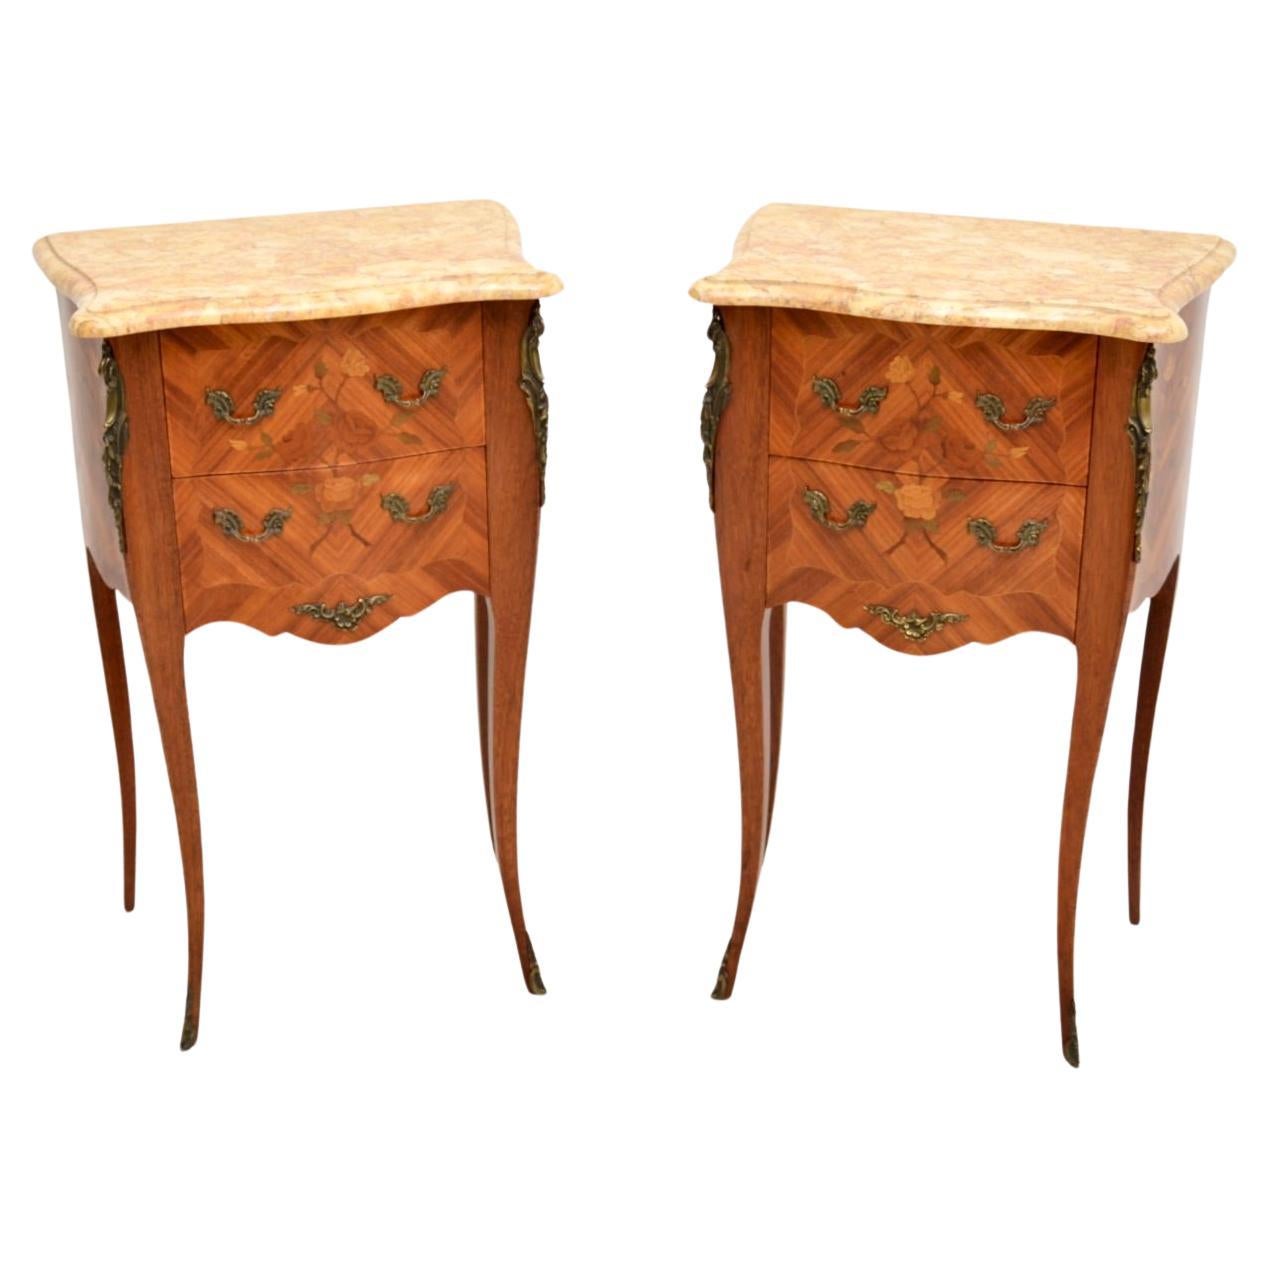 Pair of Antique French Inlaid Marble Top Bedside Chests For Sale